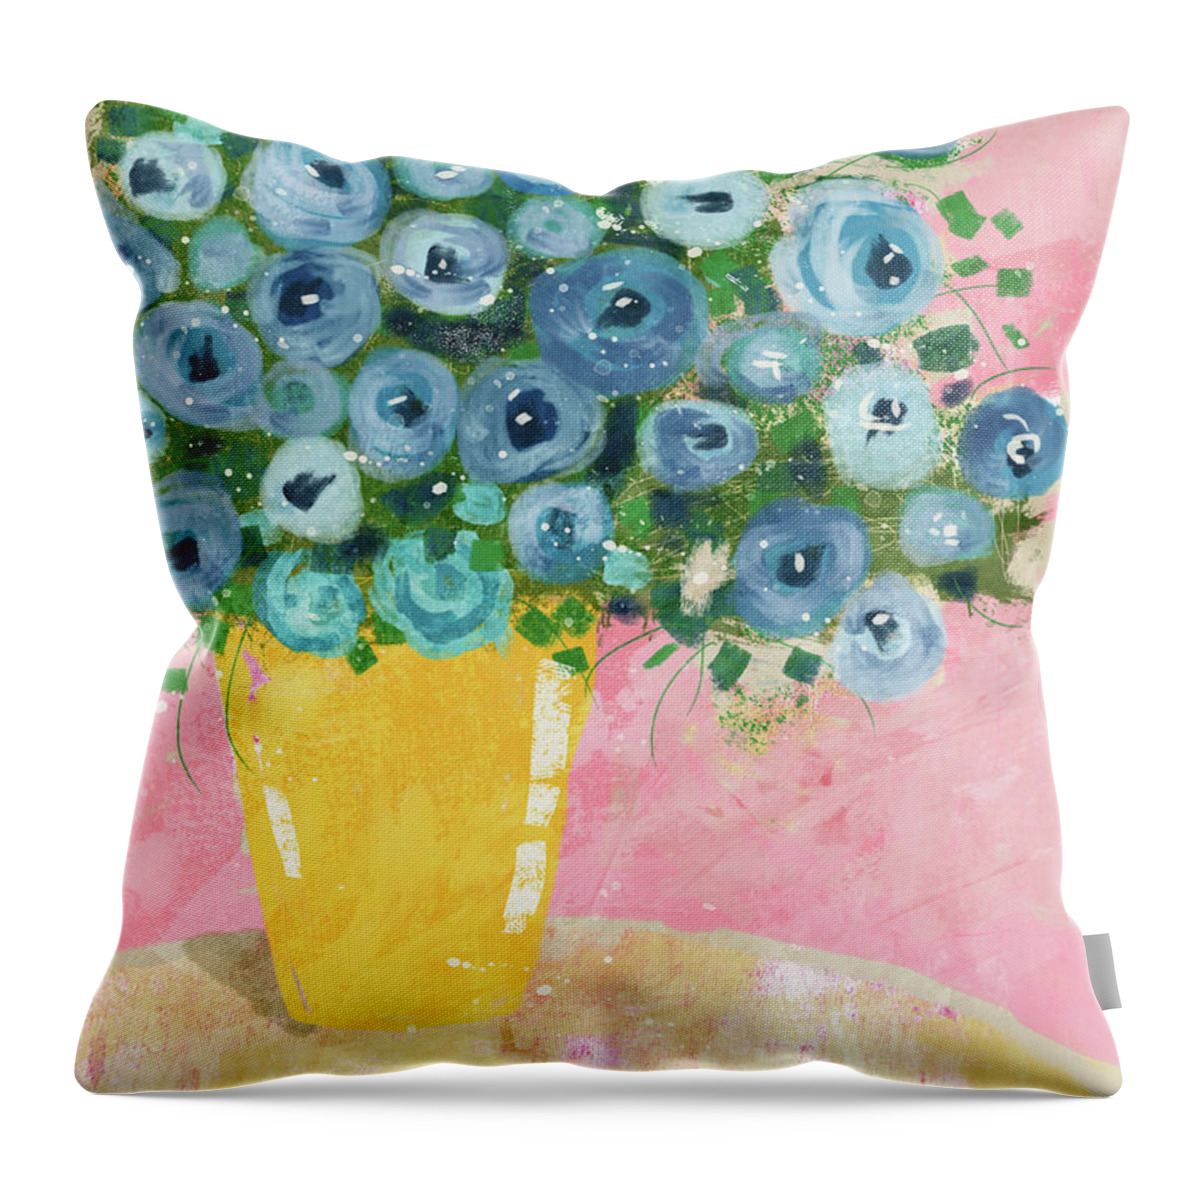 Flowers Throw Pillow featuring the mixed media Blue Flowers in A Yellow Vase- Art by Linda Woods by Linda Woods